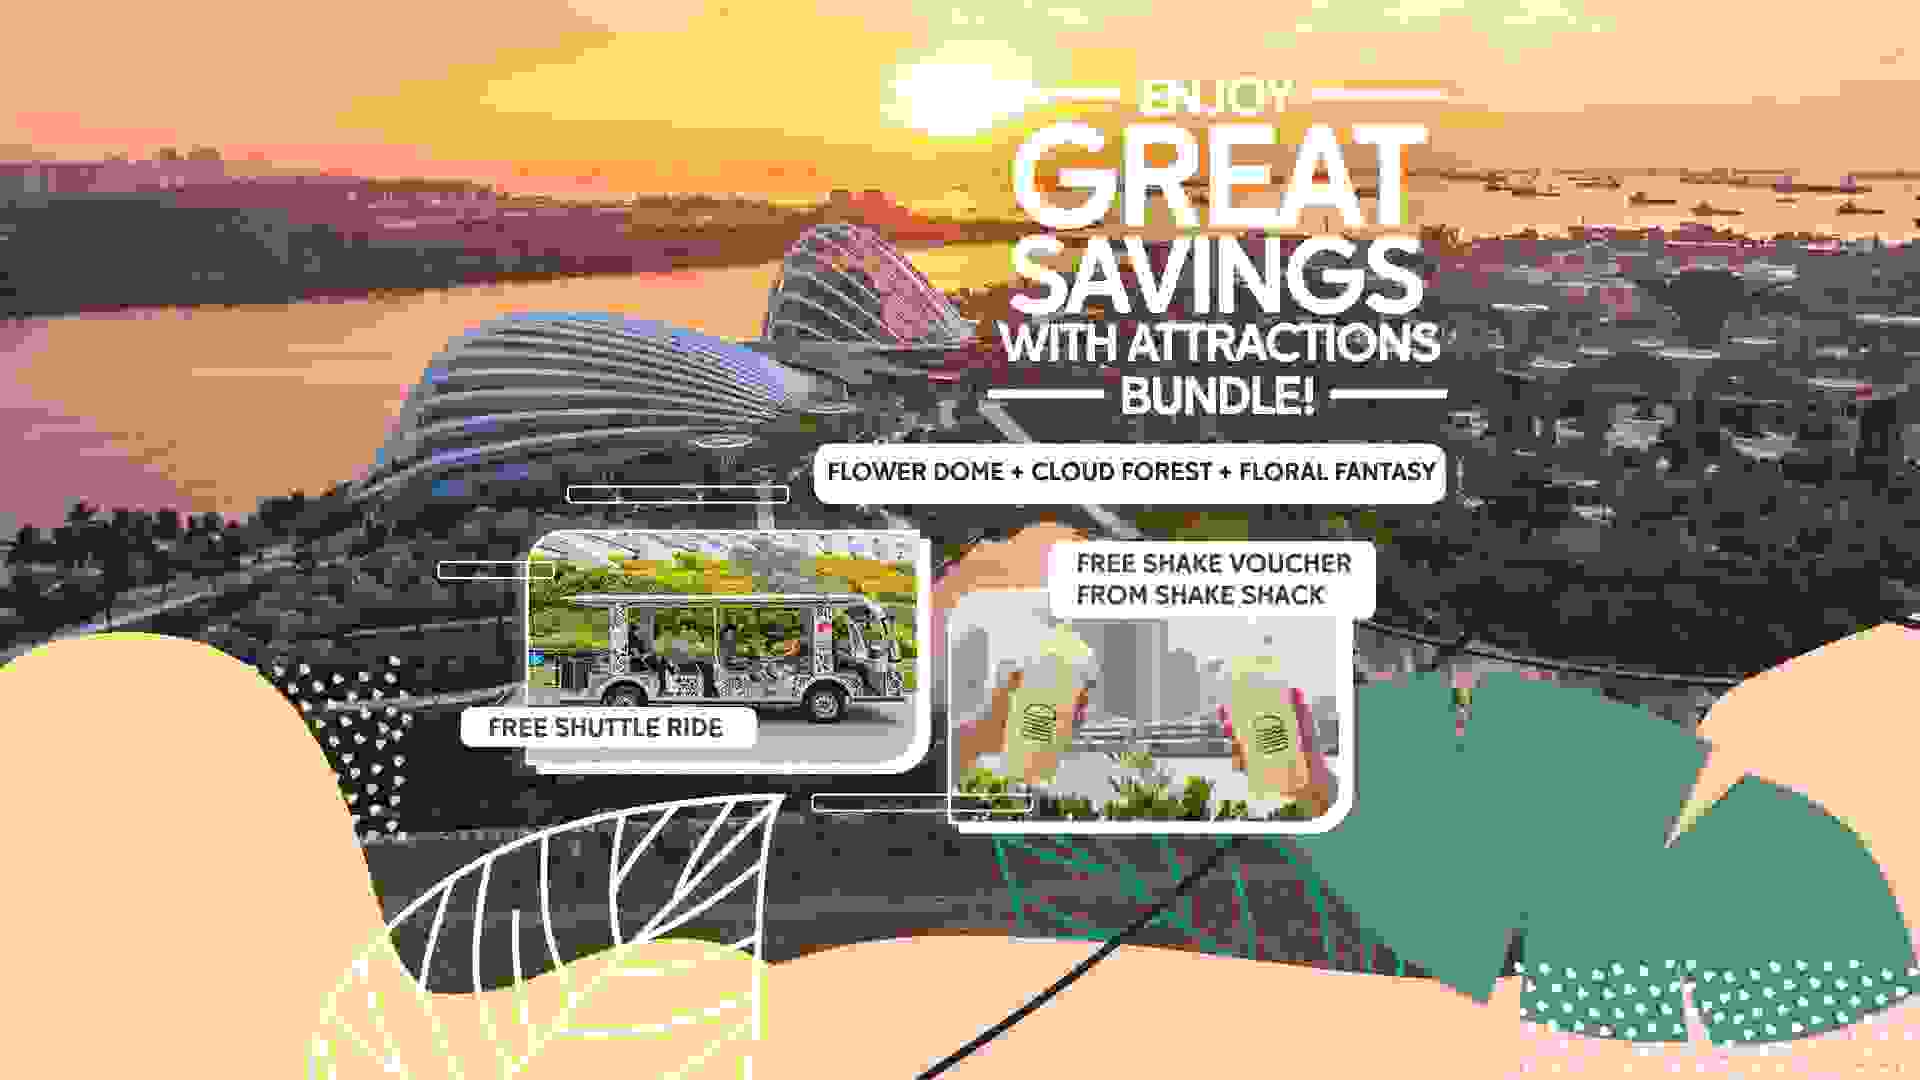 Attractions Bundle with Shake Voucher